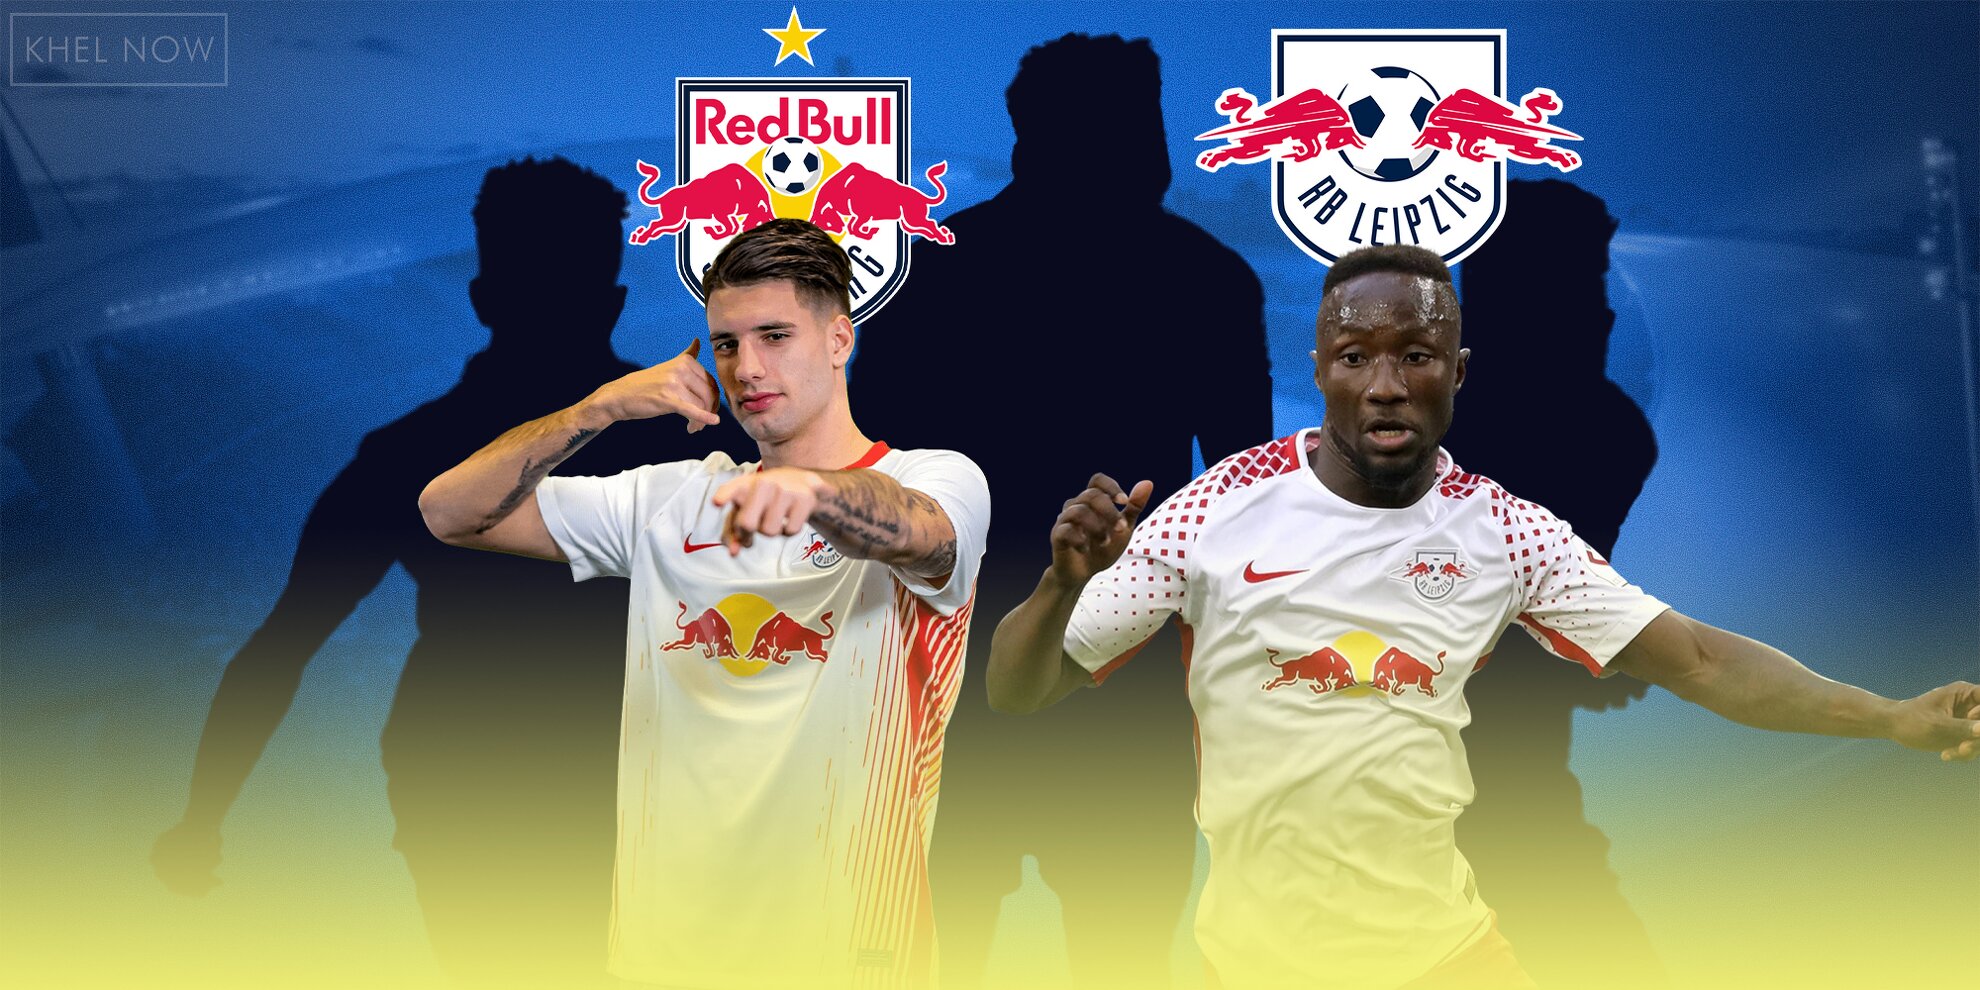 Hælde Ambitiøs Tid Five players who have moved from RB Salzburg to RB Leipzig